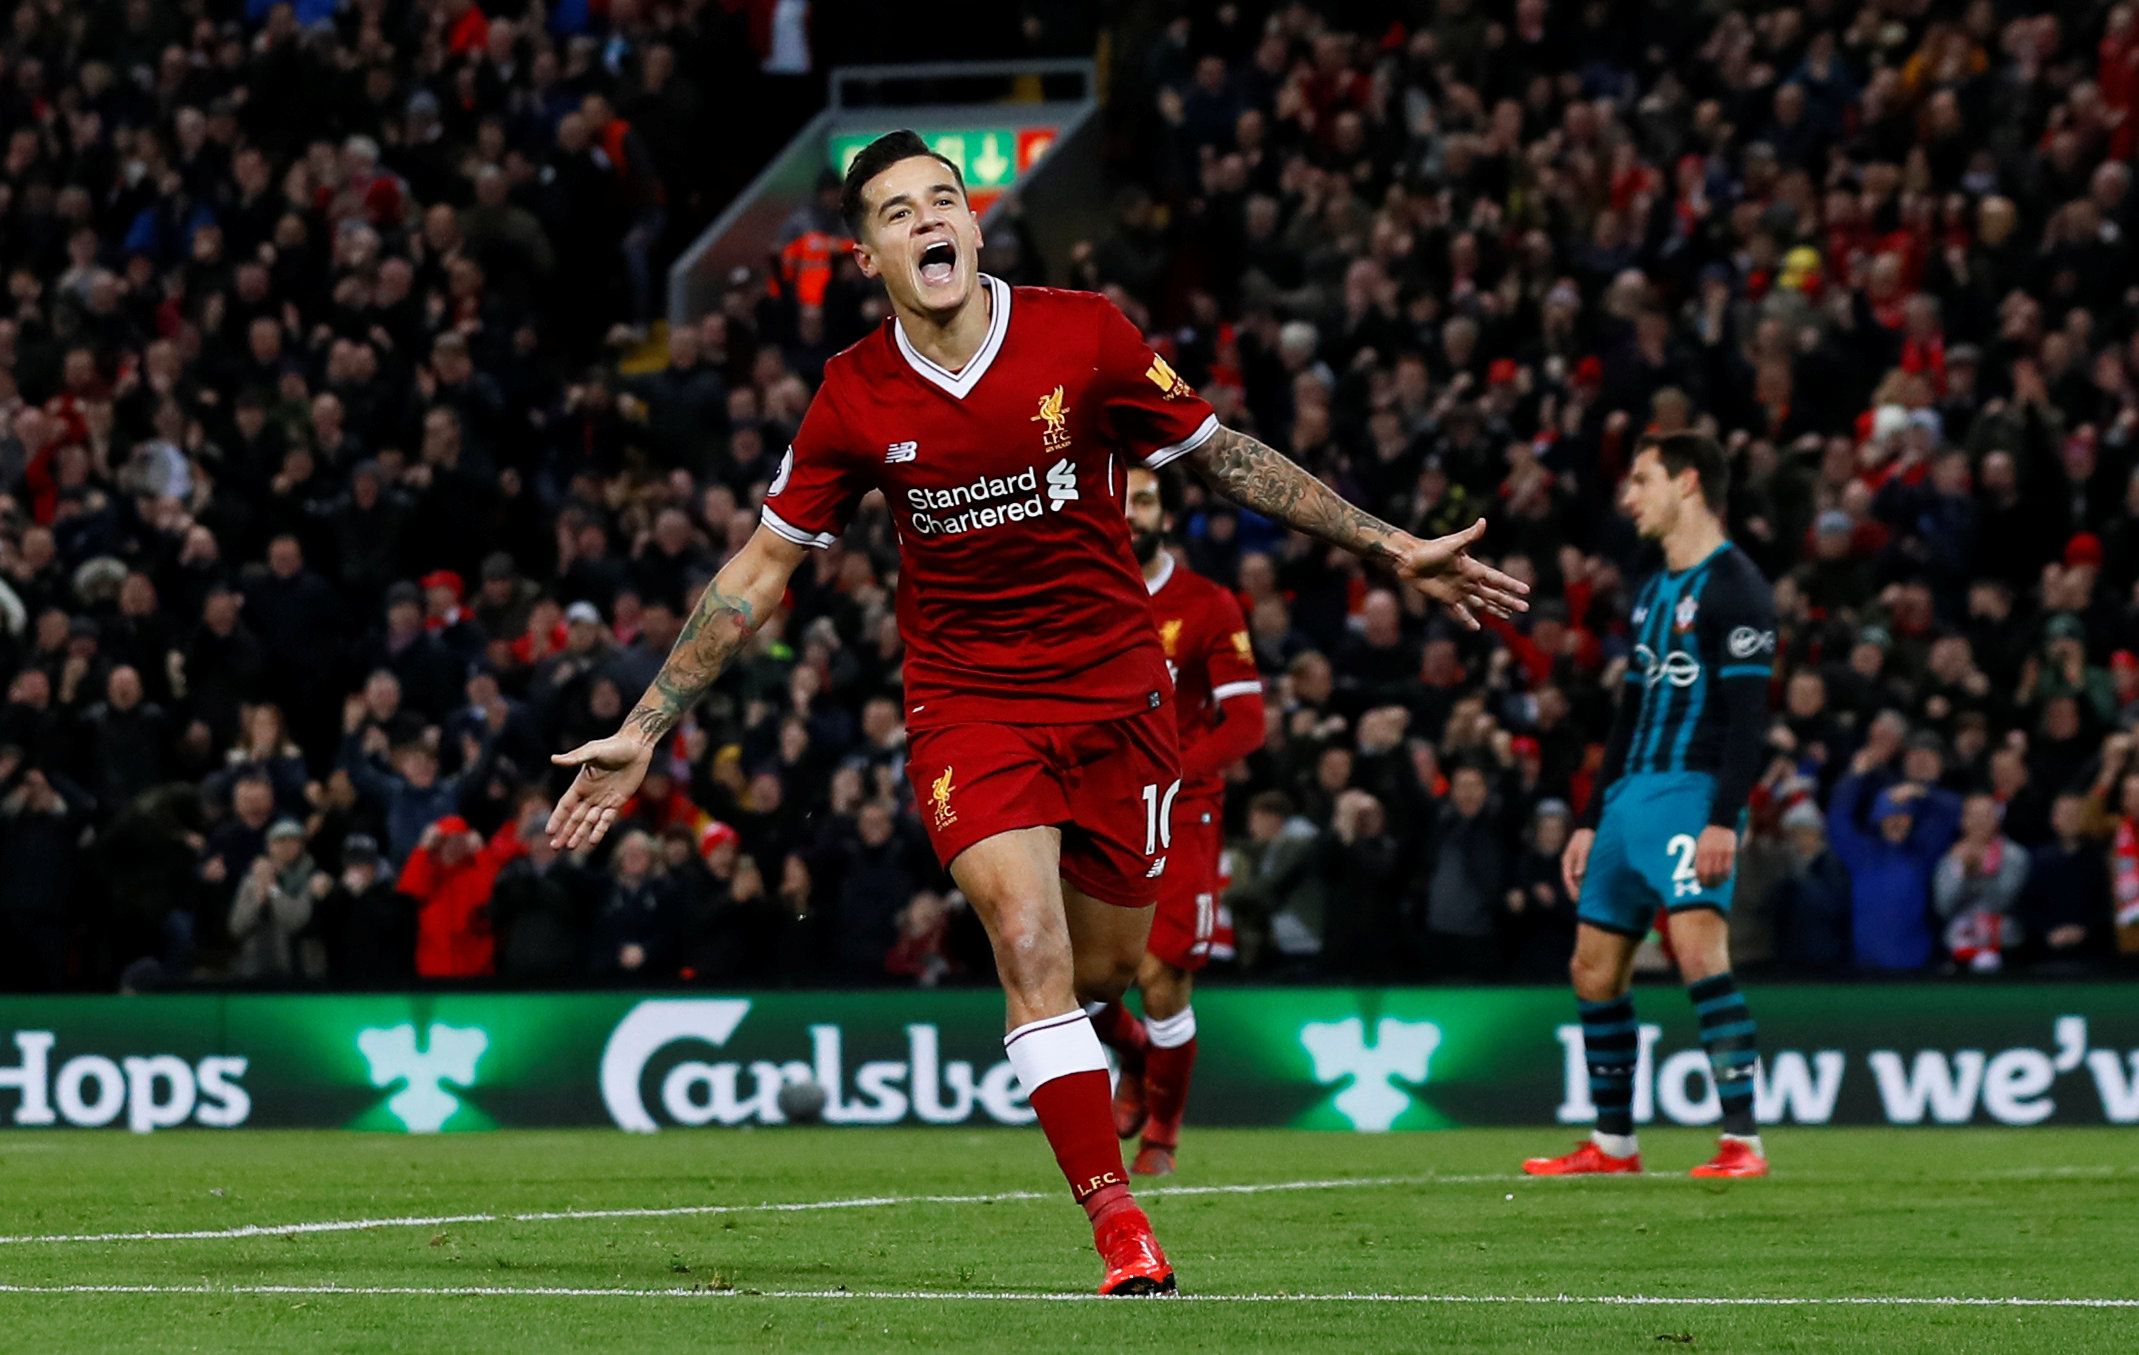 Soccer Football - Premier League - Liverpool vs Southampton - Anfield, Liverpool, Britain - November 18, 2017   Liverpool's Philippe Coutinho celebrates after scoring their third goal    Action Images via Reuters/Jason Cairnduff    EDITORIAL USE ONLY. No use with unauthorized audio, video, data, fixture lists, club/league logos or "live" services. Online in-match use limited to 75 images, no video emulation. No use in betting, games or single club/league/player publications. Please contact your 